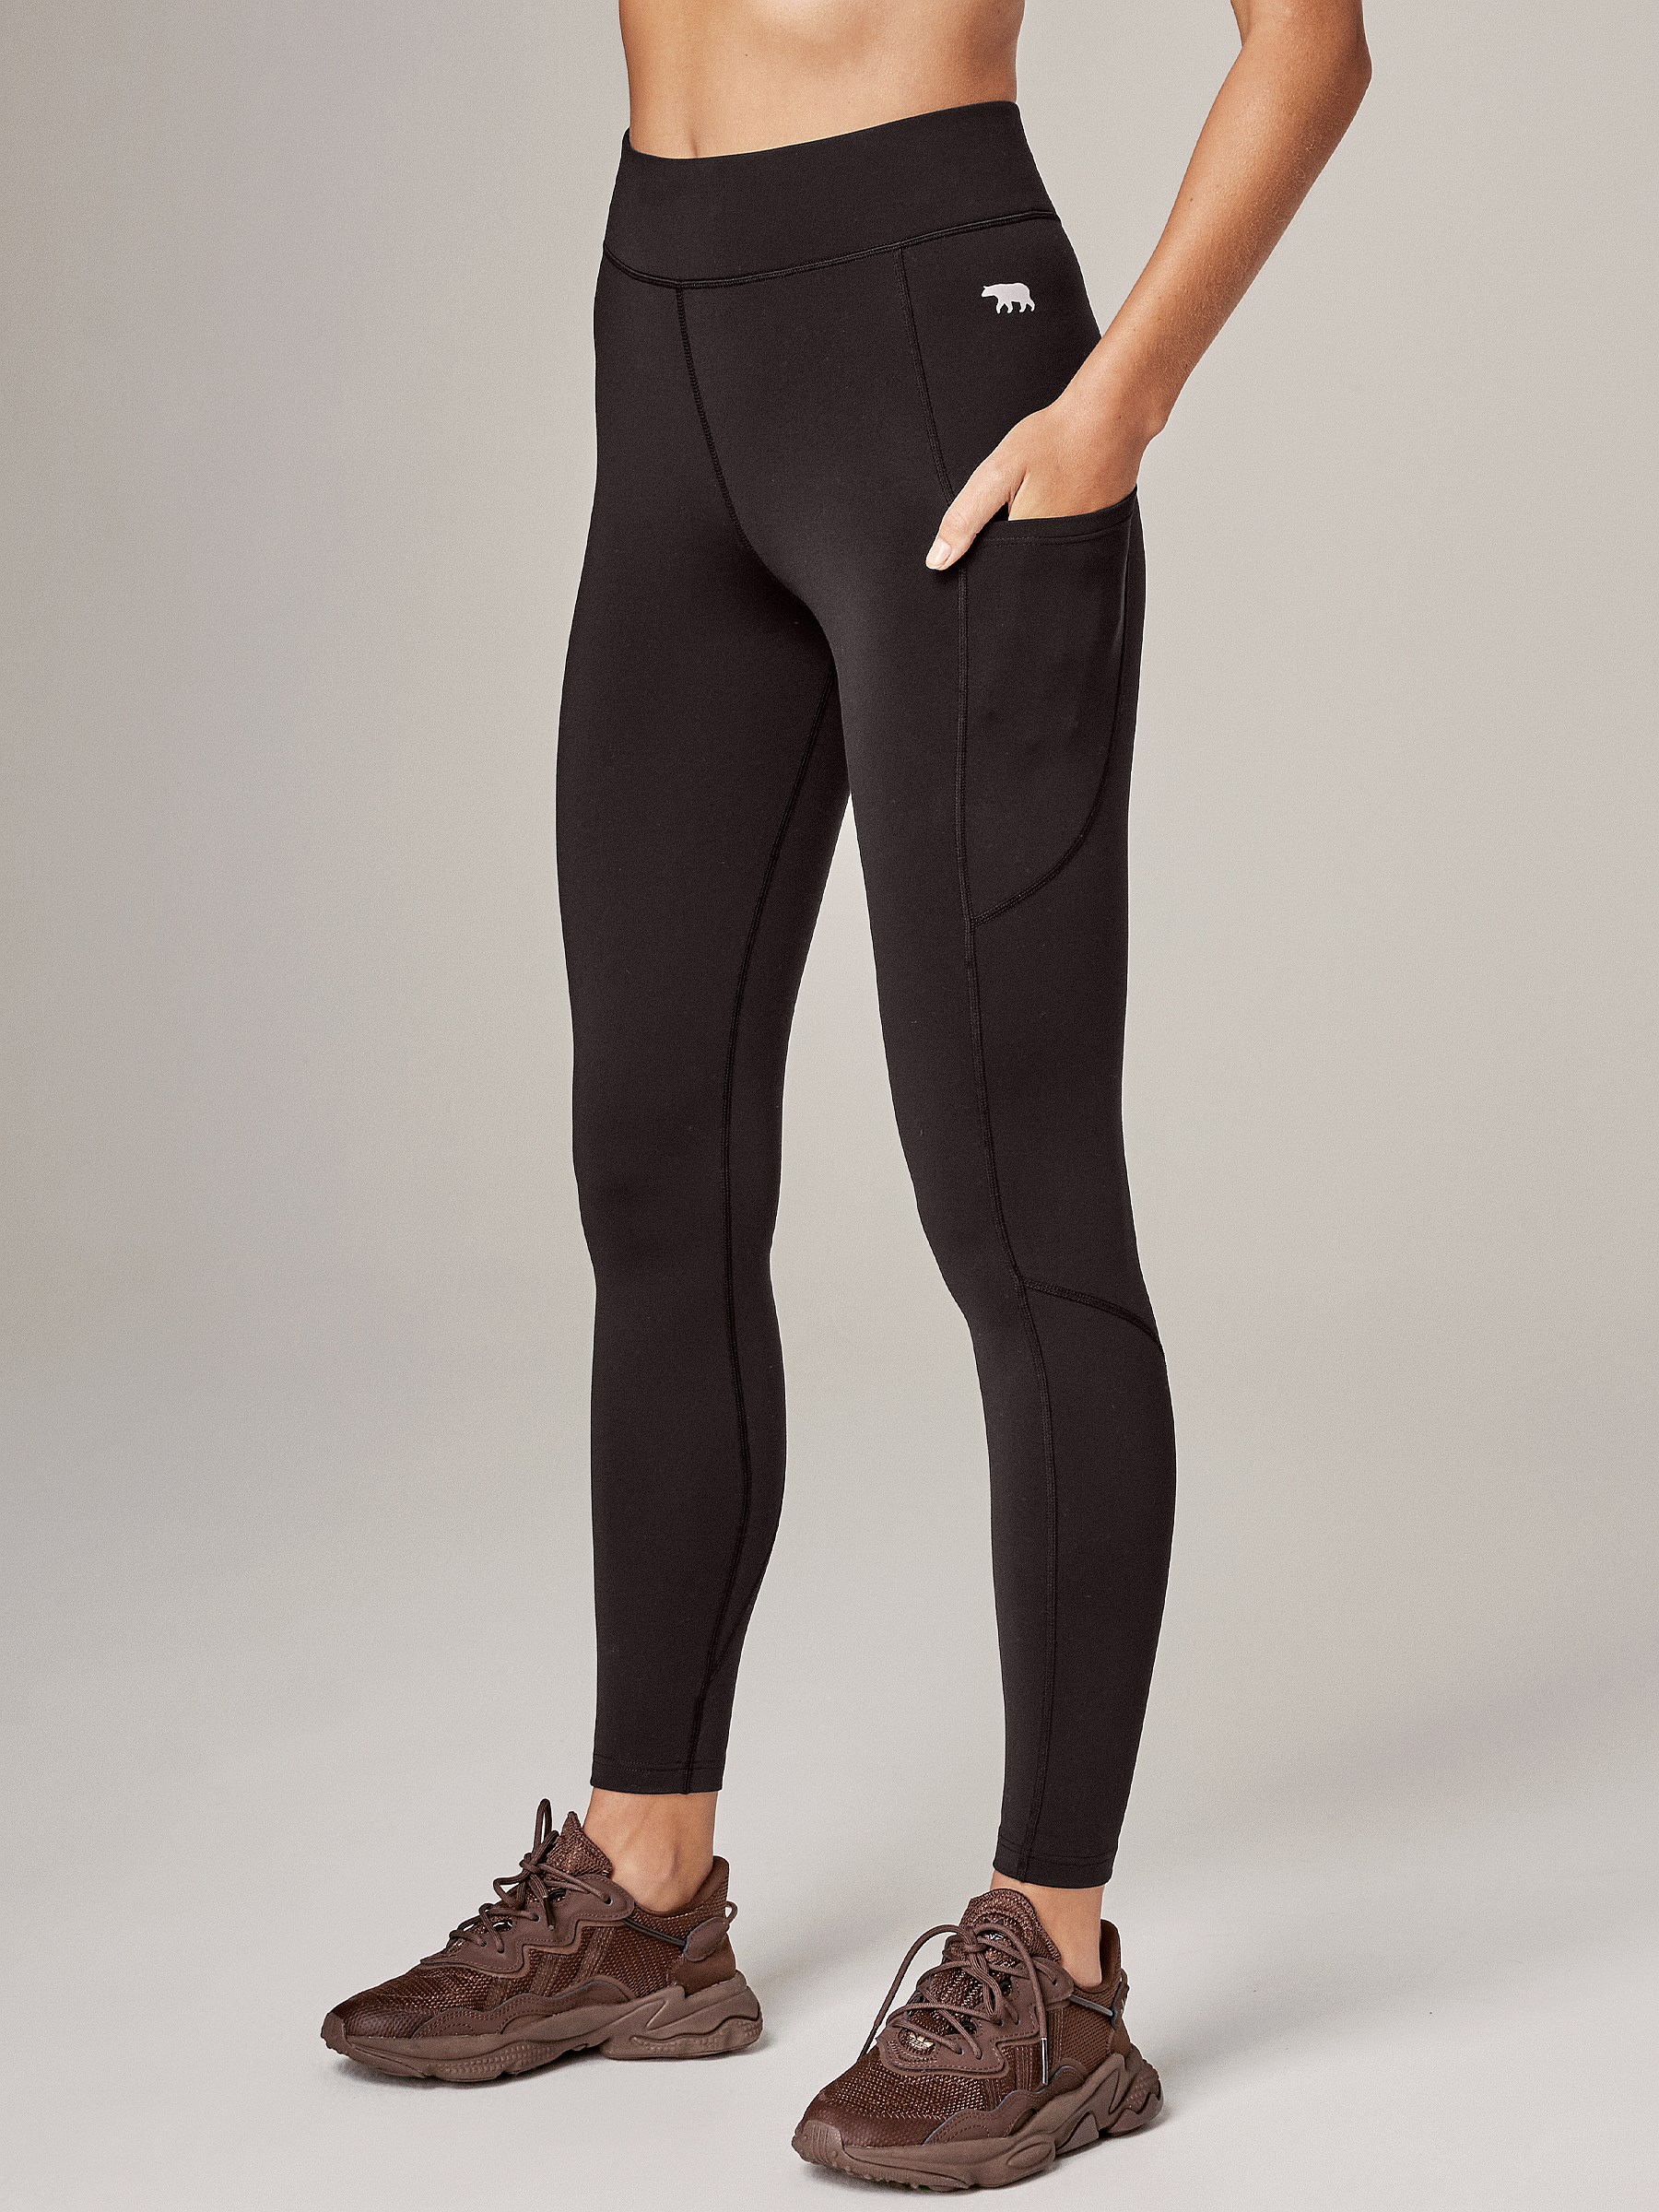 Women's Thermal Leggings & Tights Running Bare Thermal Activewear